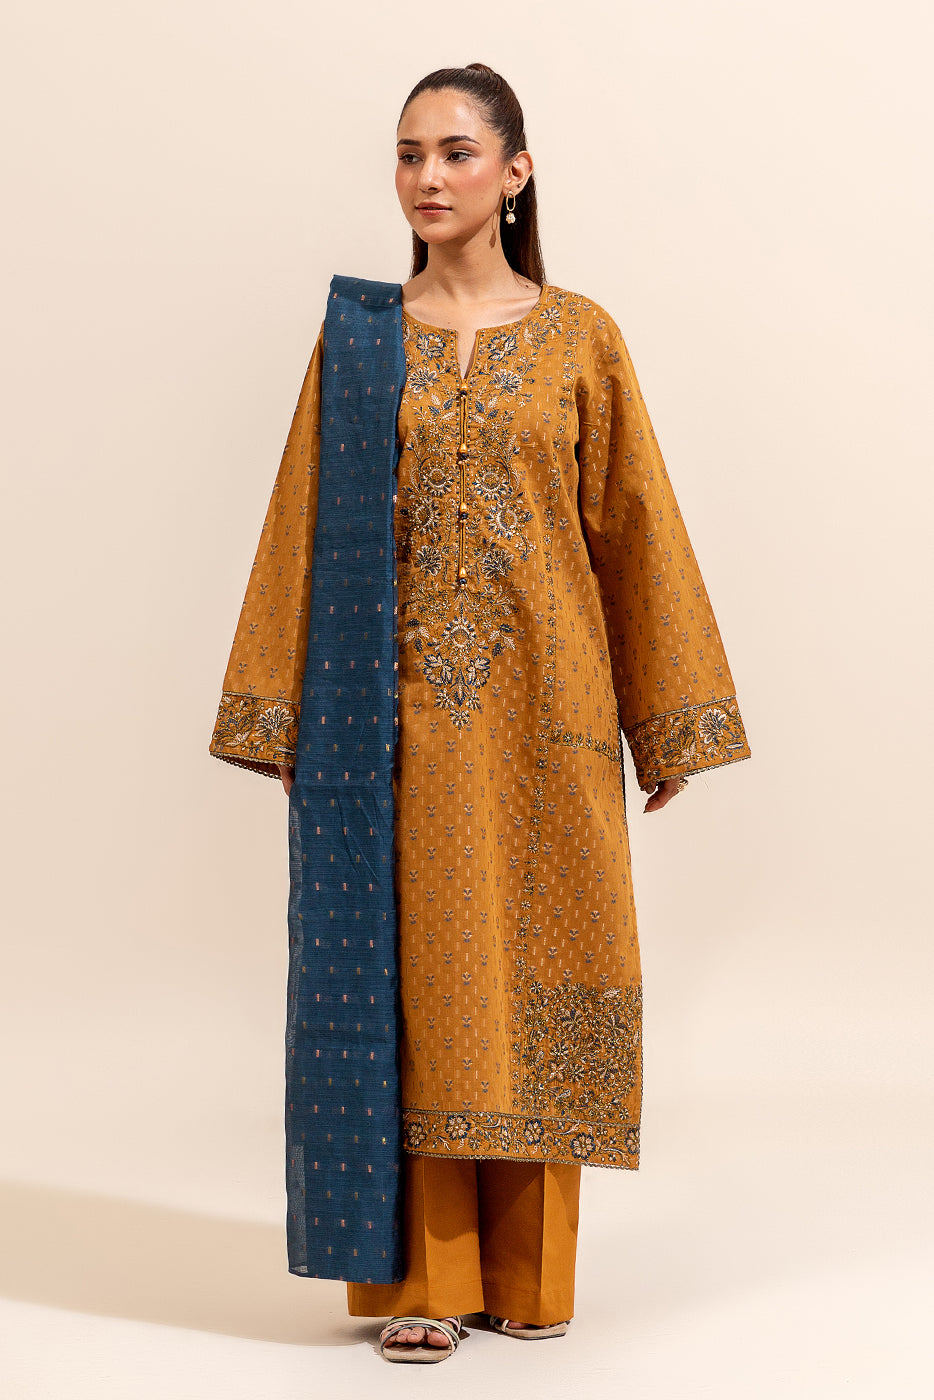 3 PIECE EMBROIDERED JACQUARD SUIT-MEDALLION YALE (UNSTITCHED)